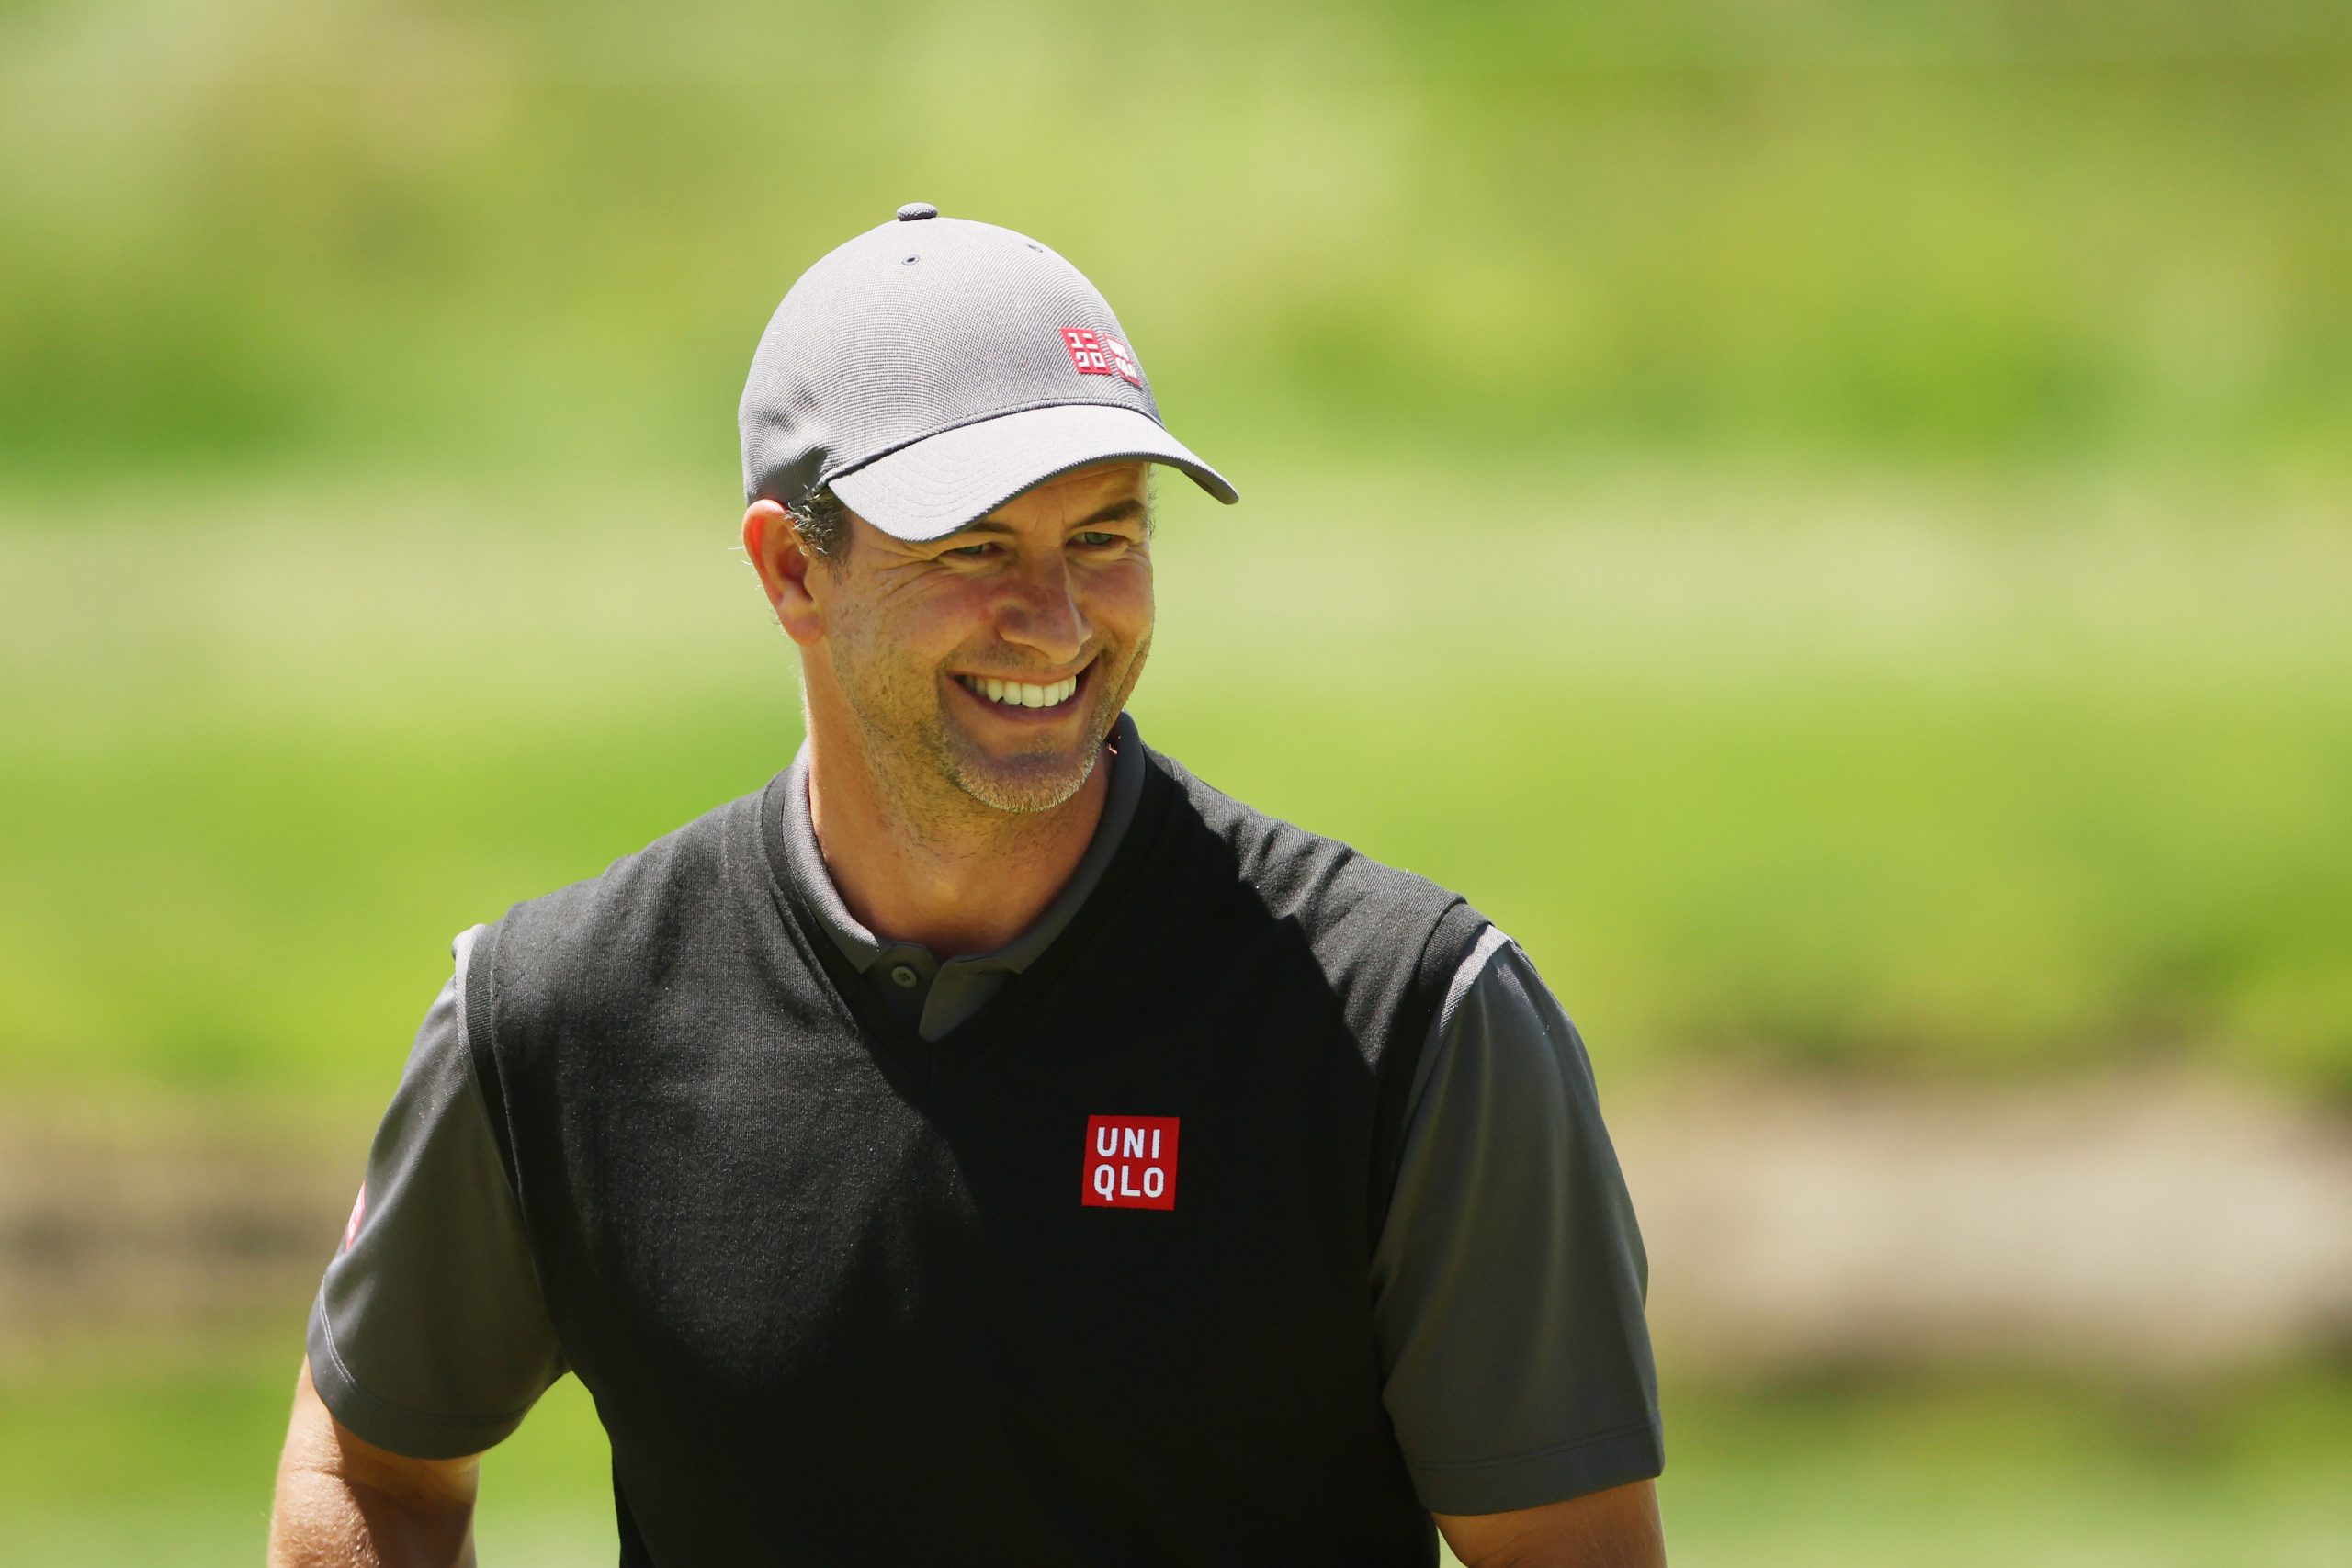 Adam Scott of Australia smiles on the 12th green during a practice round prior to the 122nd U.S. Open Championship at The Country Club on June 15, 2022 in Brookline, Massachusetts. (Photo by Patrick Smith/Getty Images)